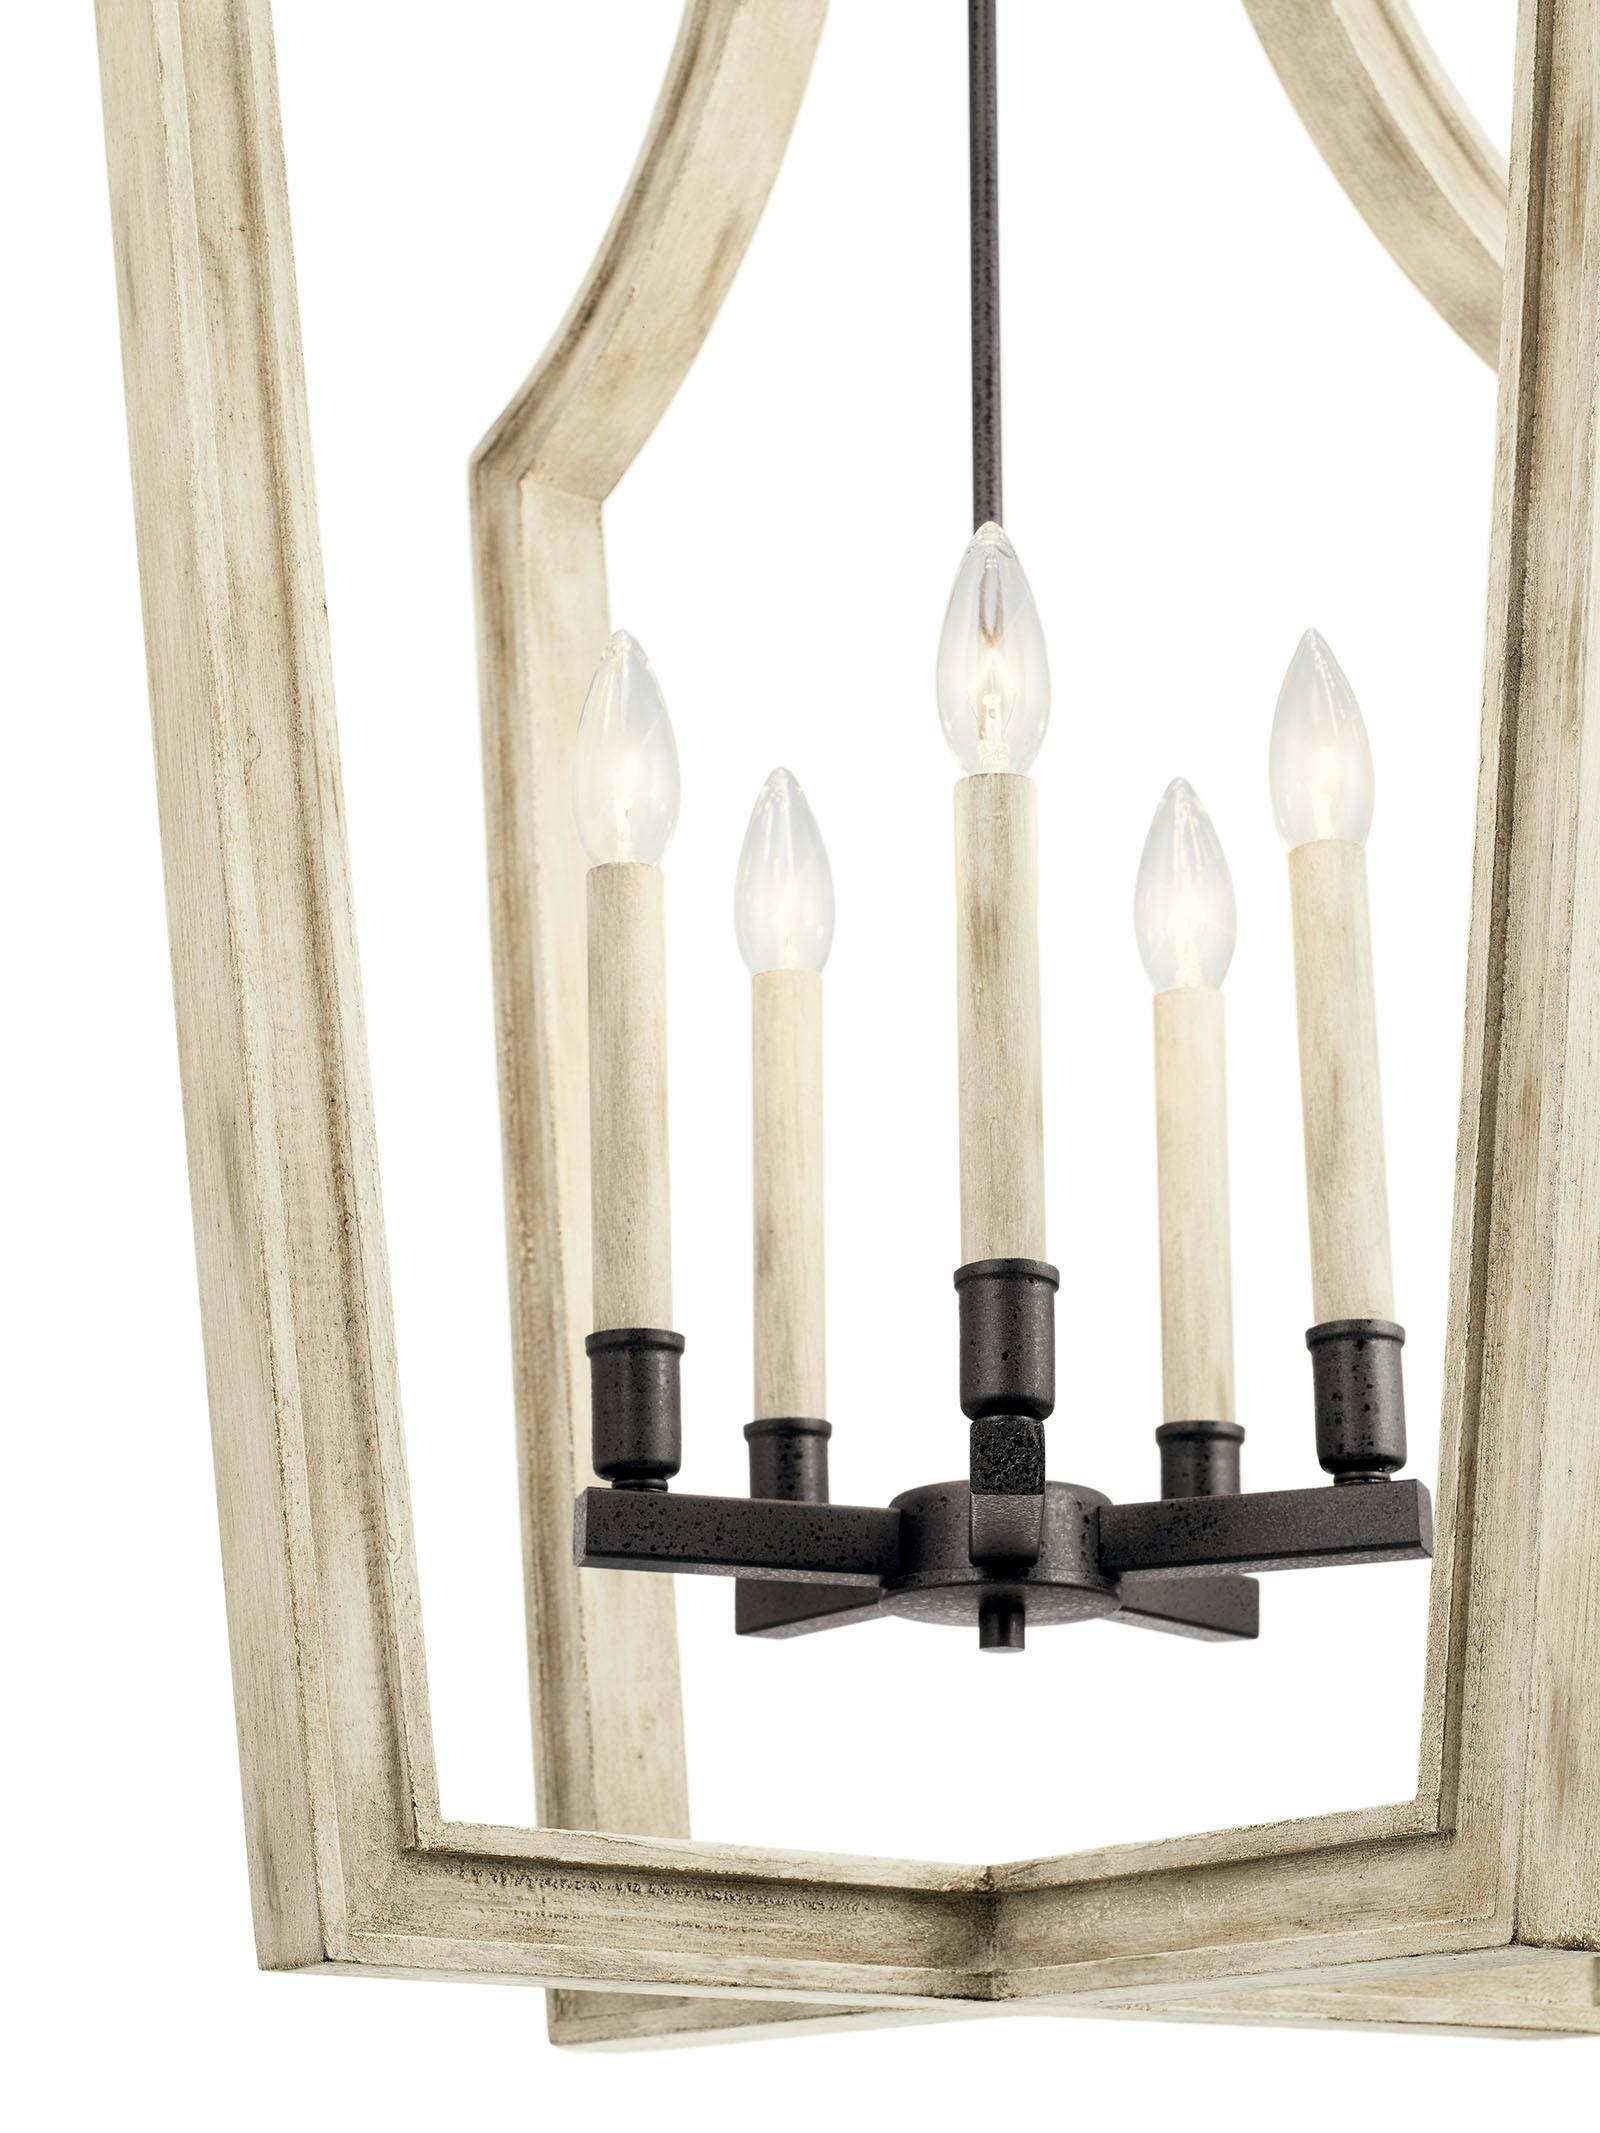 Close up view of the Botanica 5 Light Chandelier in Anvil Iron on a white background